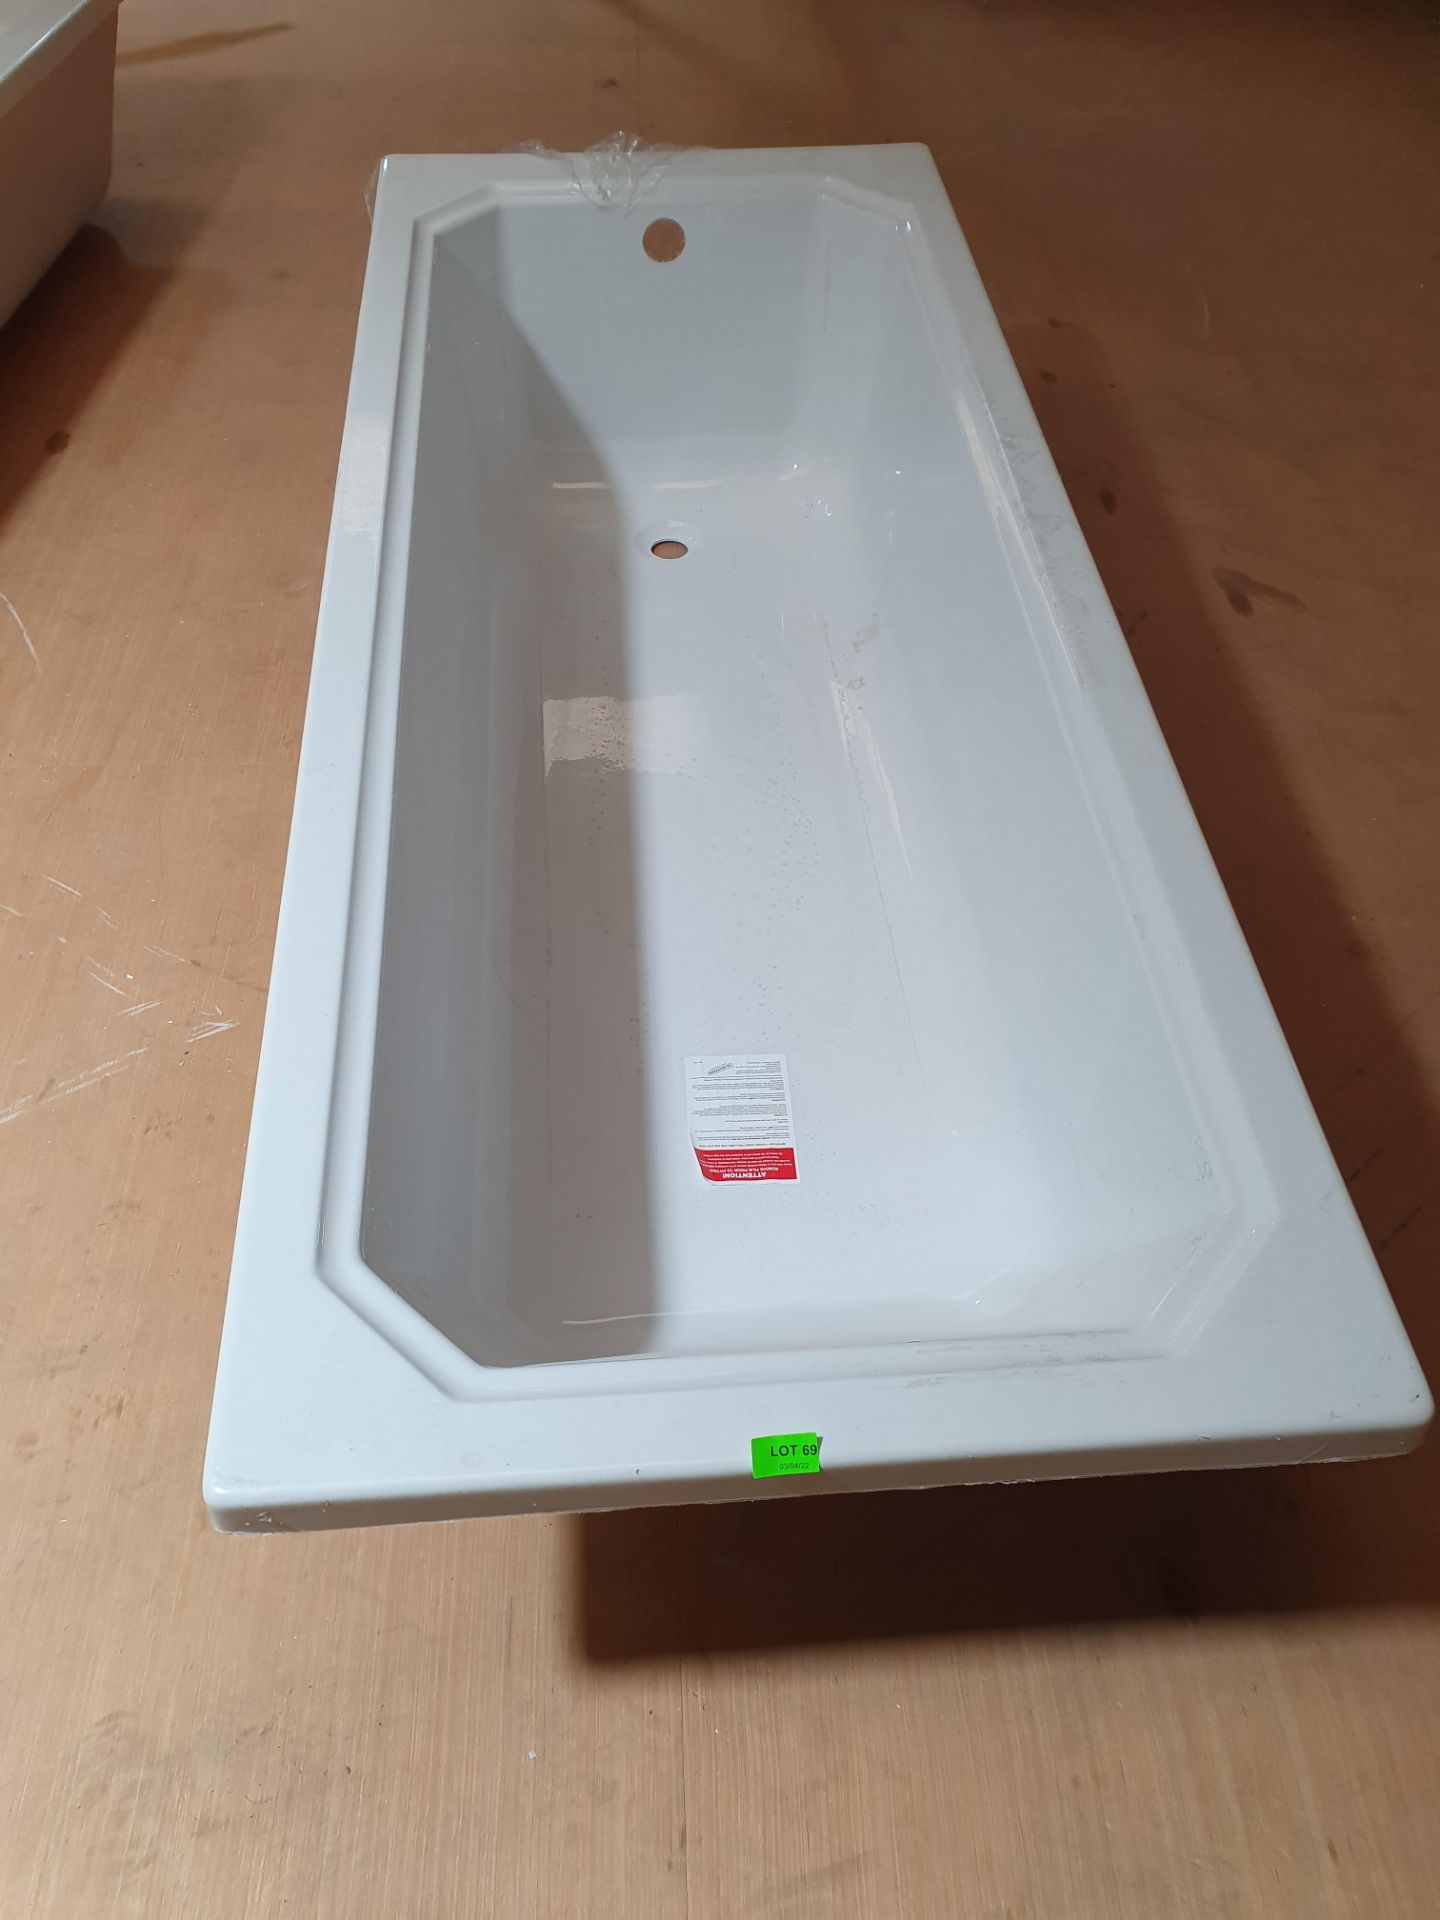 1700 x 700mm Single Ended Bath. In Factory wrap. RH Outside Edge Chipped But Wont Be Seen When Fitt